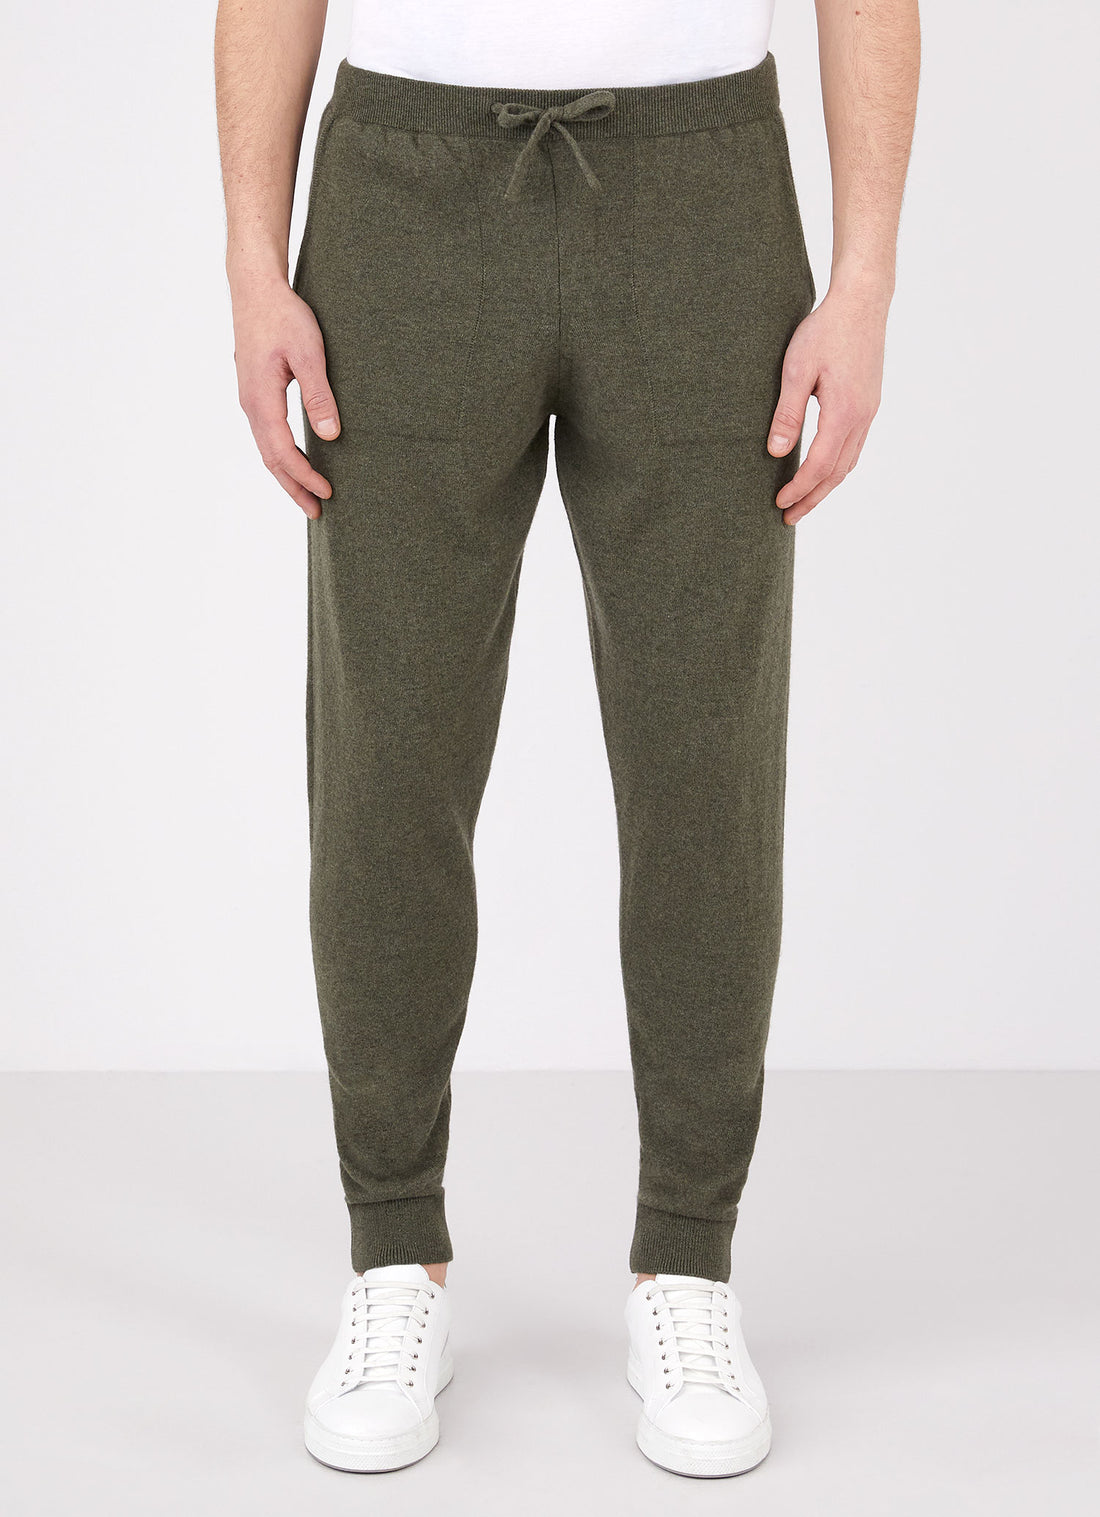 Men's Cashmere Lounge Pant in Dark Moss